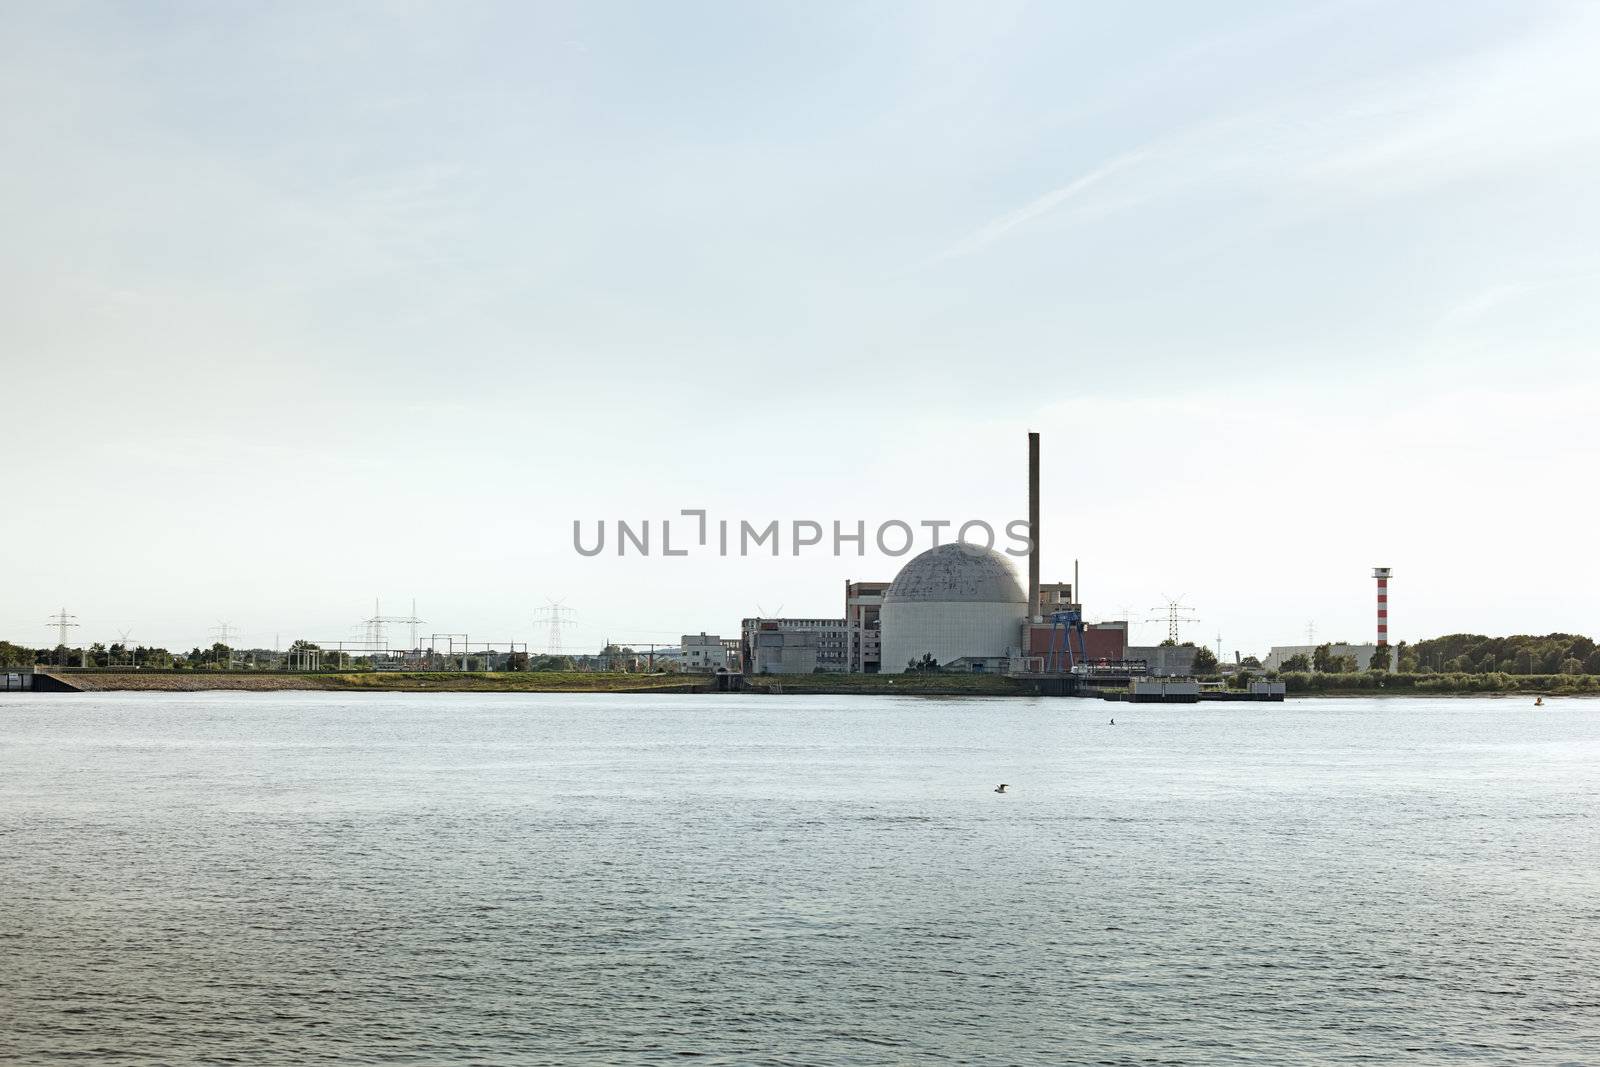 Nuclear plant near river in Stade, Germany